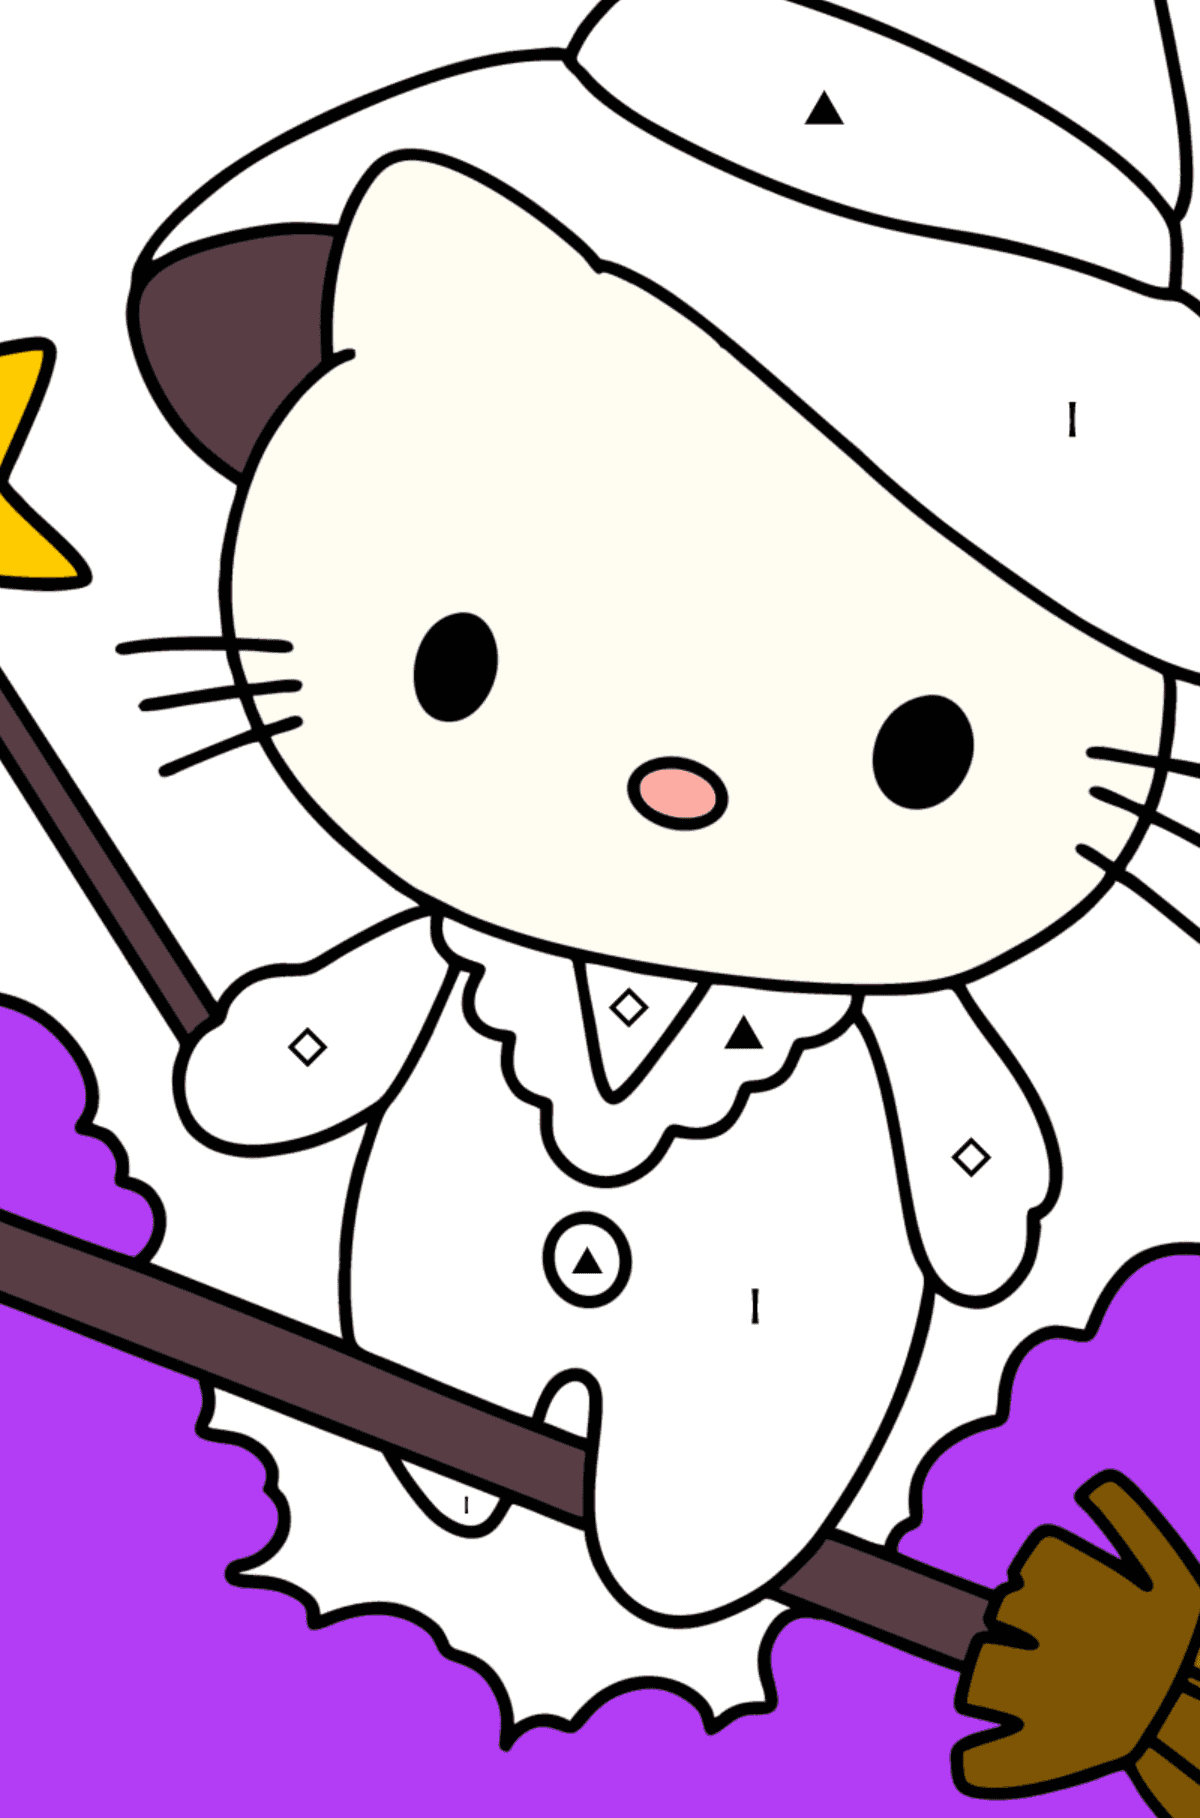 Hello Kitty Halloween coloring page - Coloring by Symbols for Kids